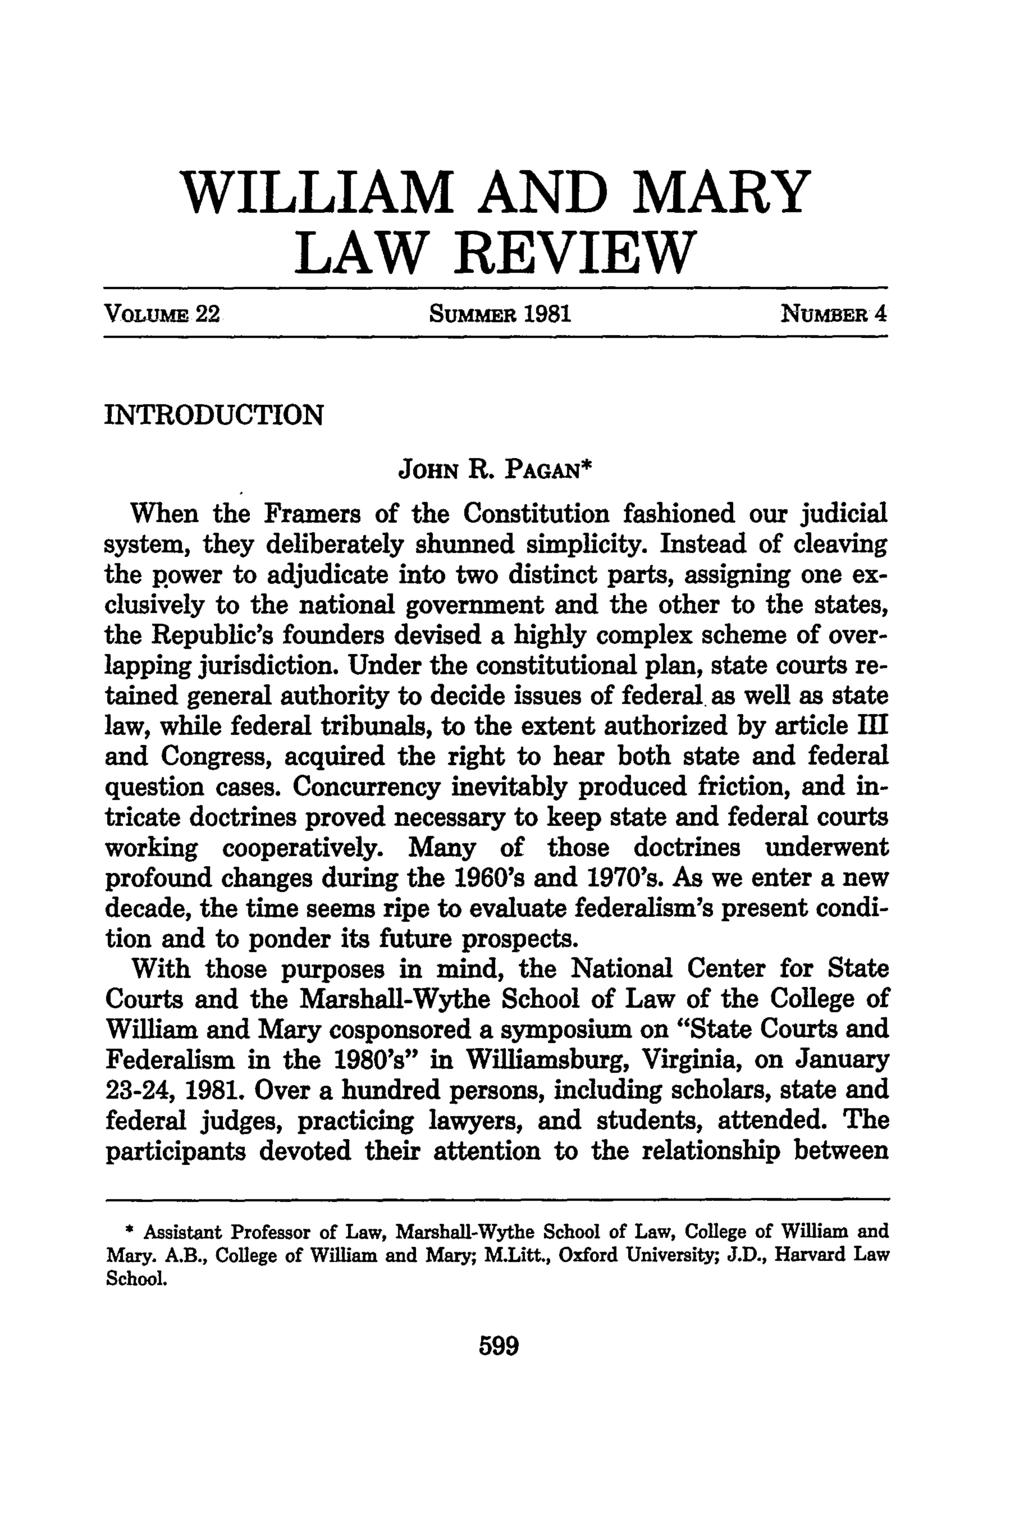 WILLIAM AND MARY LAW REVIEW Vowxhm 22 SUMMER 1981 NUMER 4 INTRODUCTION JOHN R. PAGAN* When the Framers of the Constitution fashioned our judicial system, they deliberately shunned simplicity.